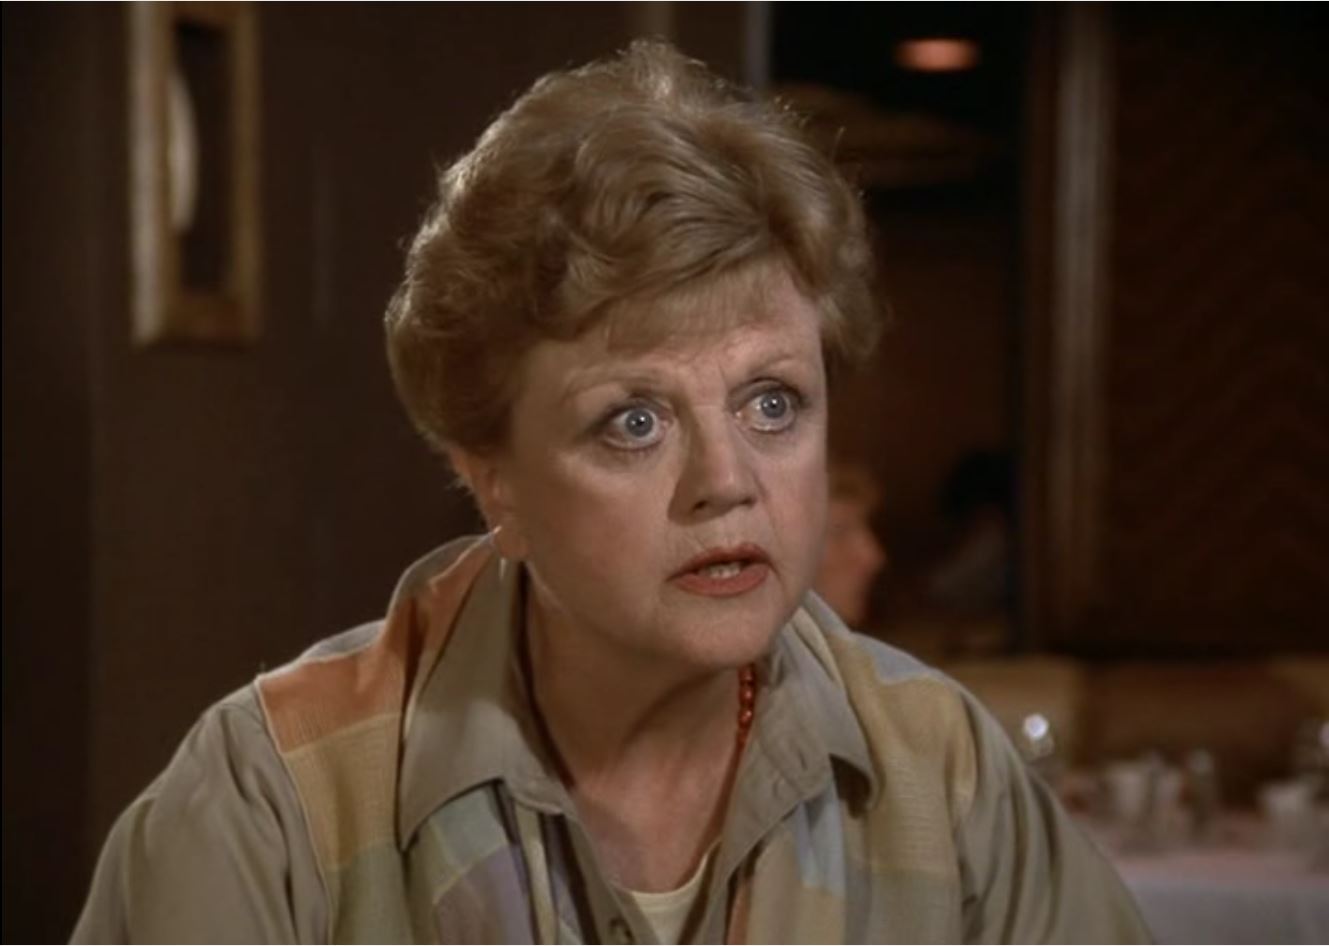 Murder She Wrote Screencaps: 10. 1x09 - Death Casts a Spell